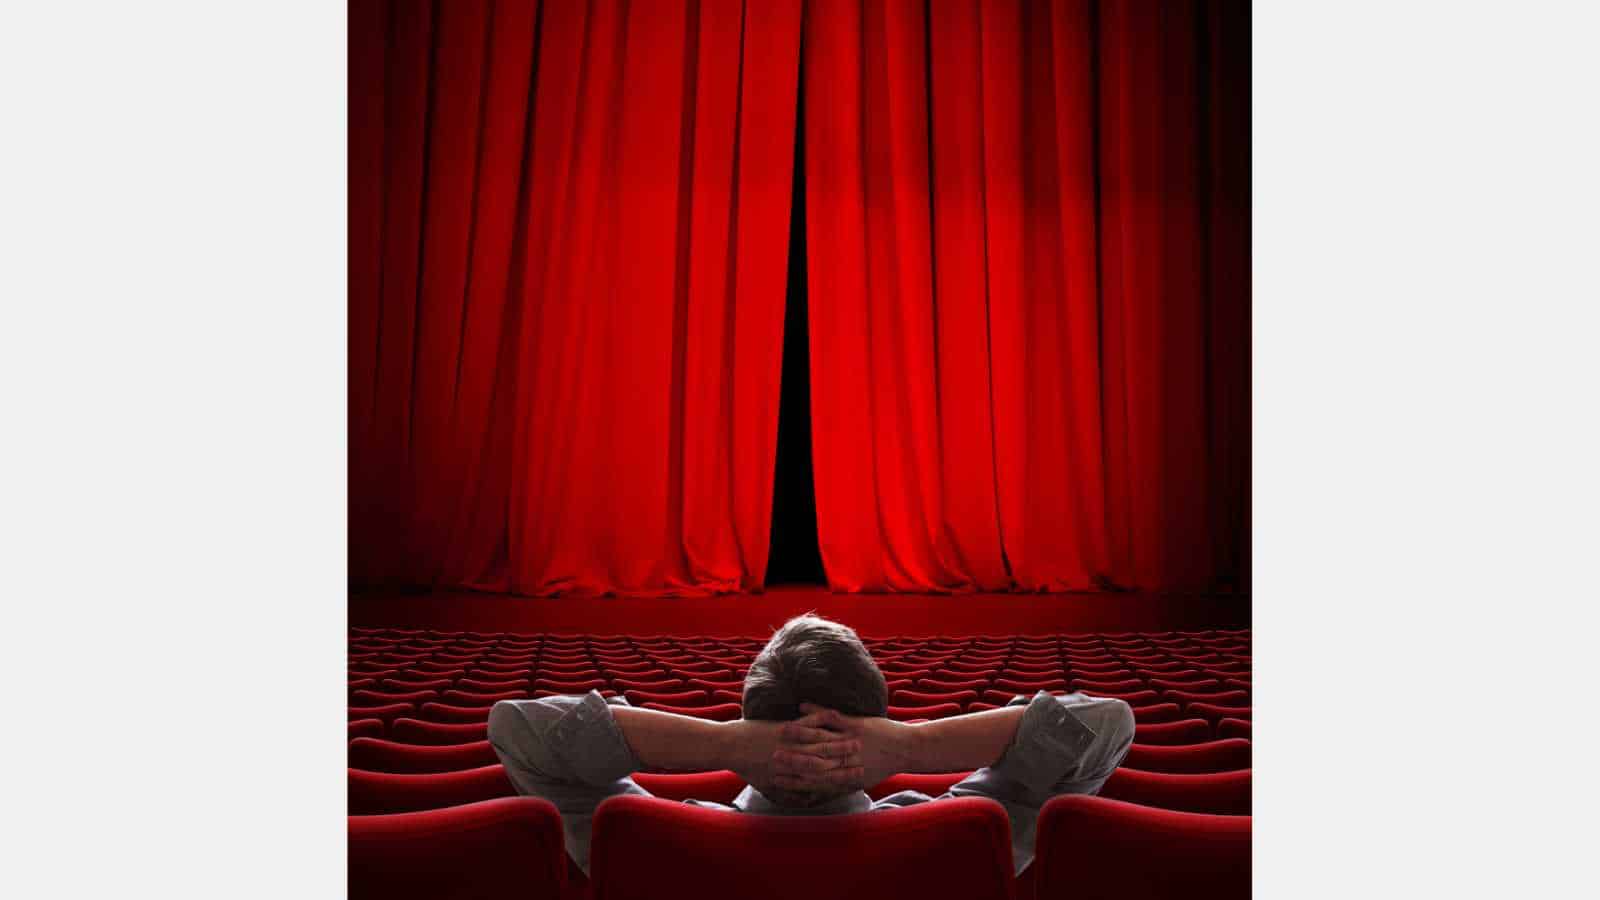 VIP sitting in movie theater red curtain 3d illustration